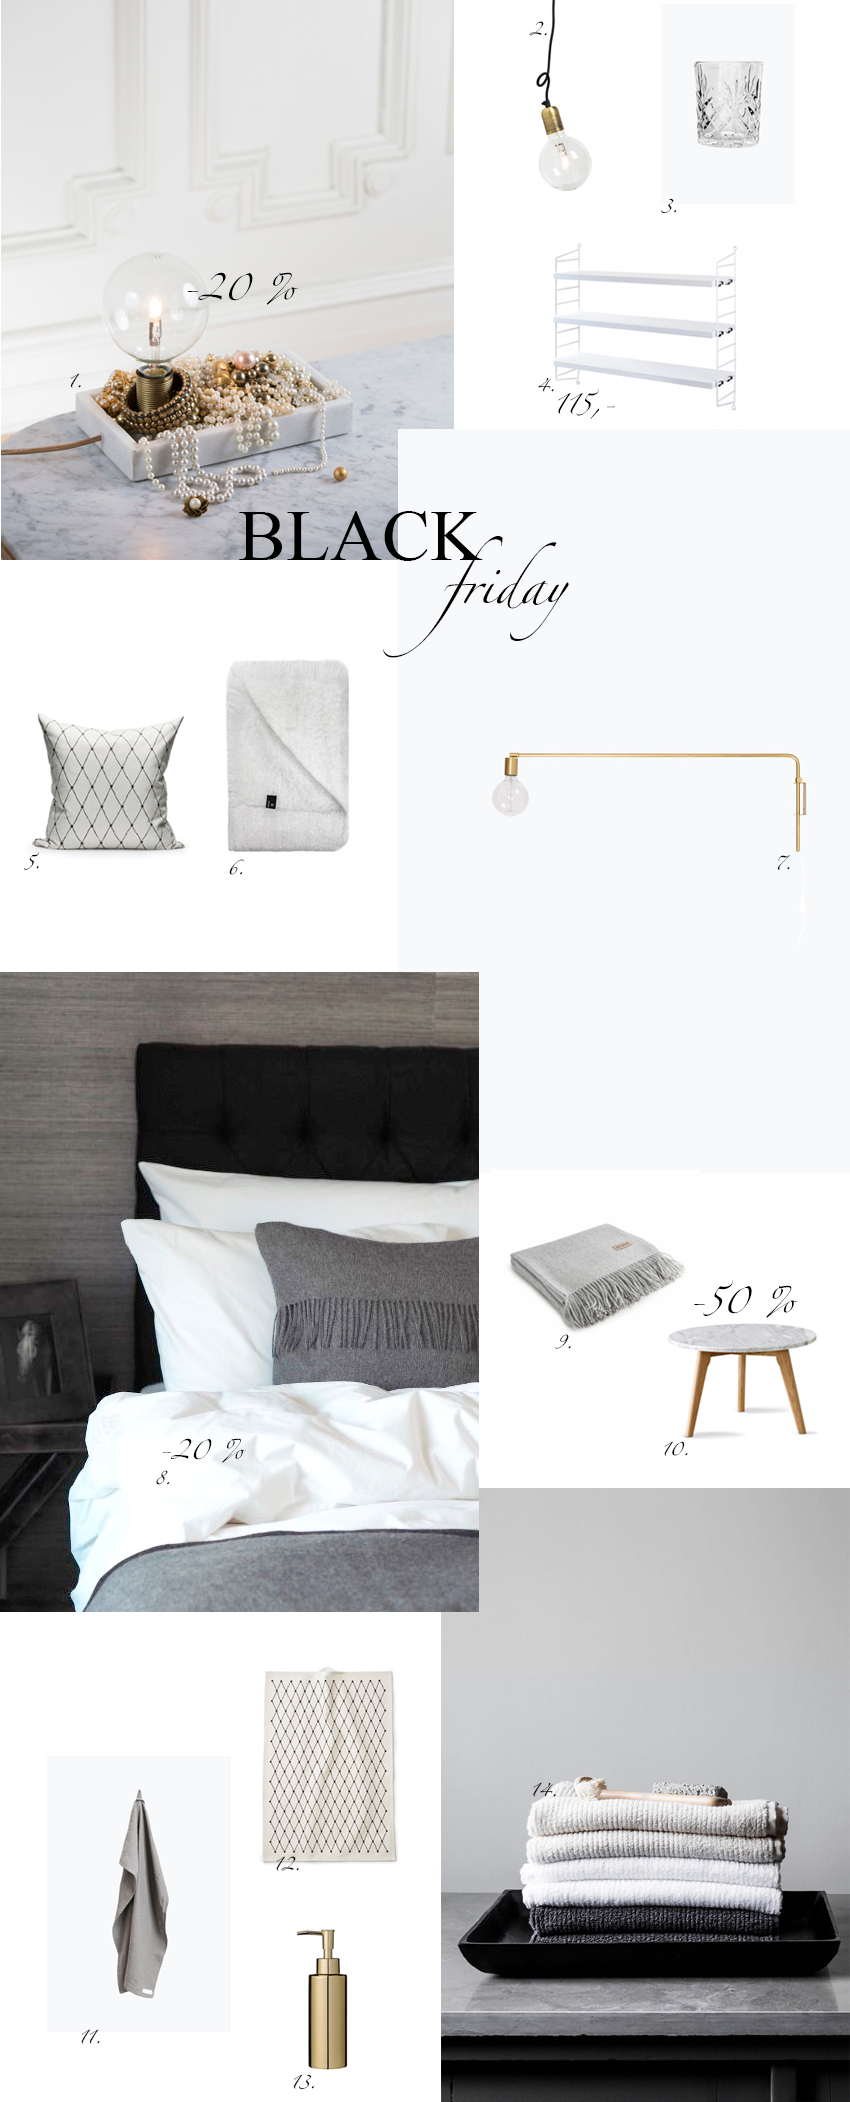 C and the city - Best Black Friday -offers for interior lovers from webshops and brands like Balmuir, Finnish Design Shop, Room21, Ellos and many more! Get the sale codes from the blog: //www.idealista.fi/charandthecity/2016/11/25/sisustuksen-black-friday-tarjoukset